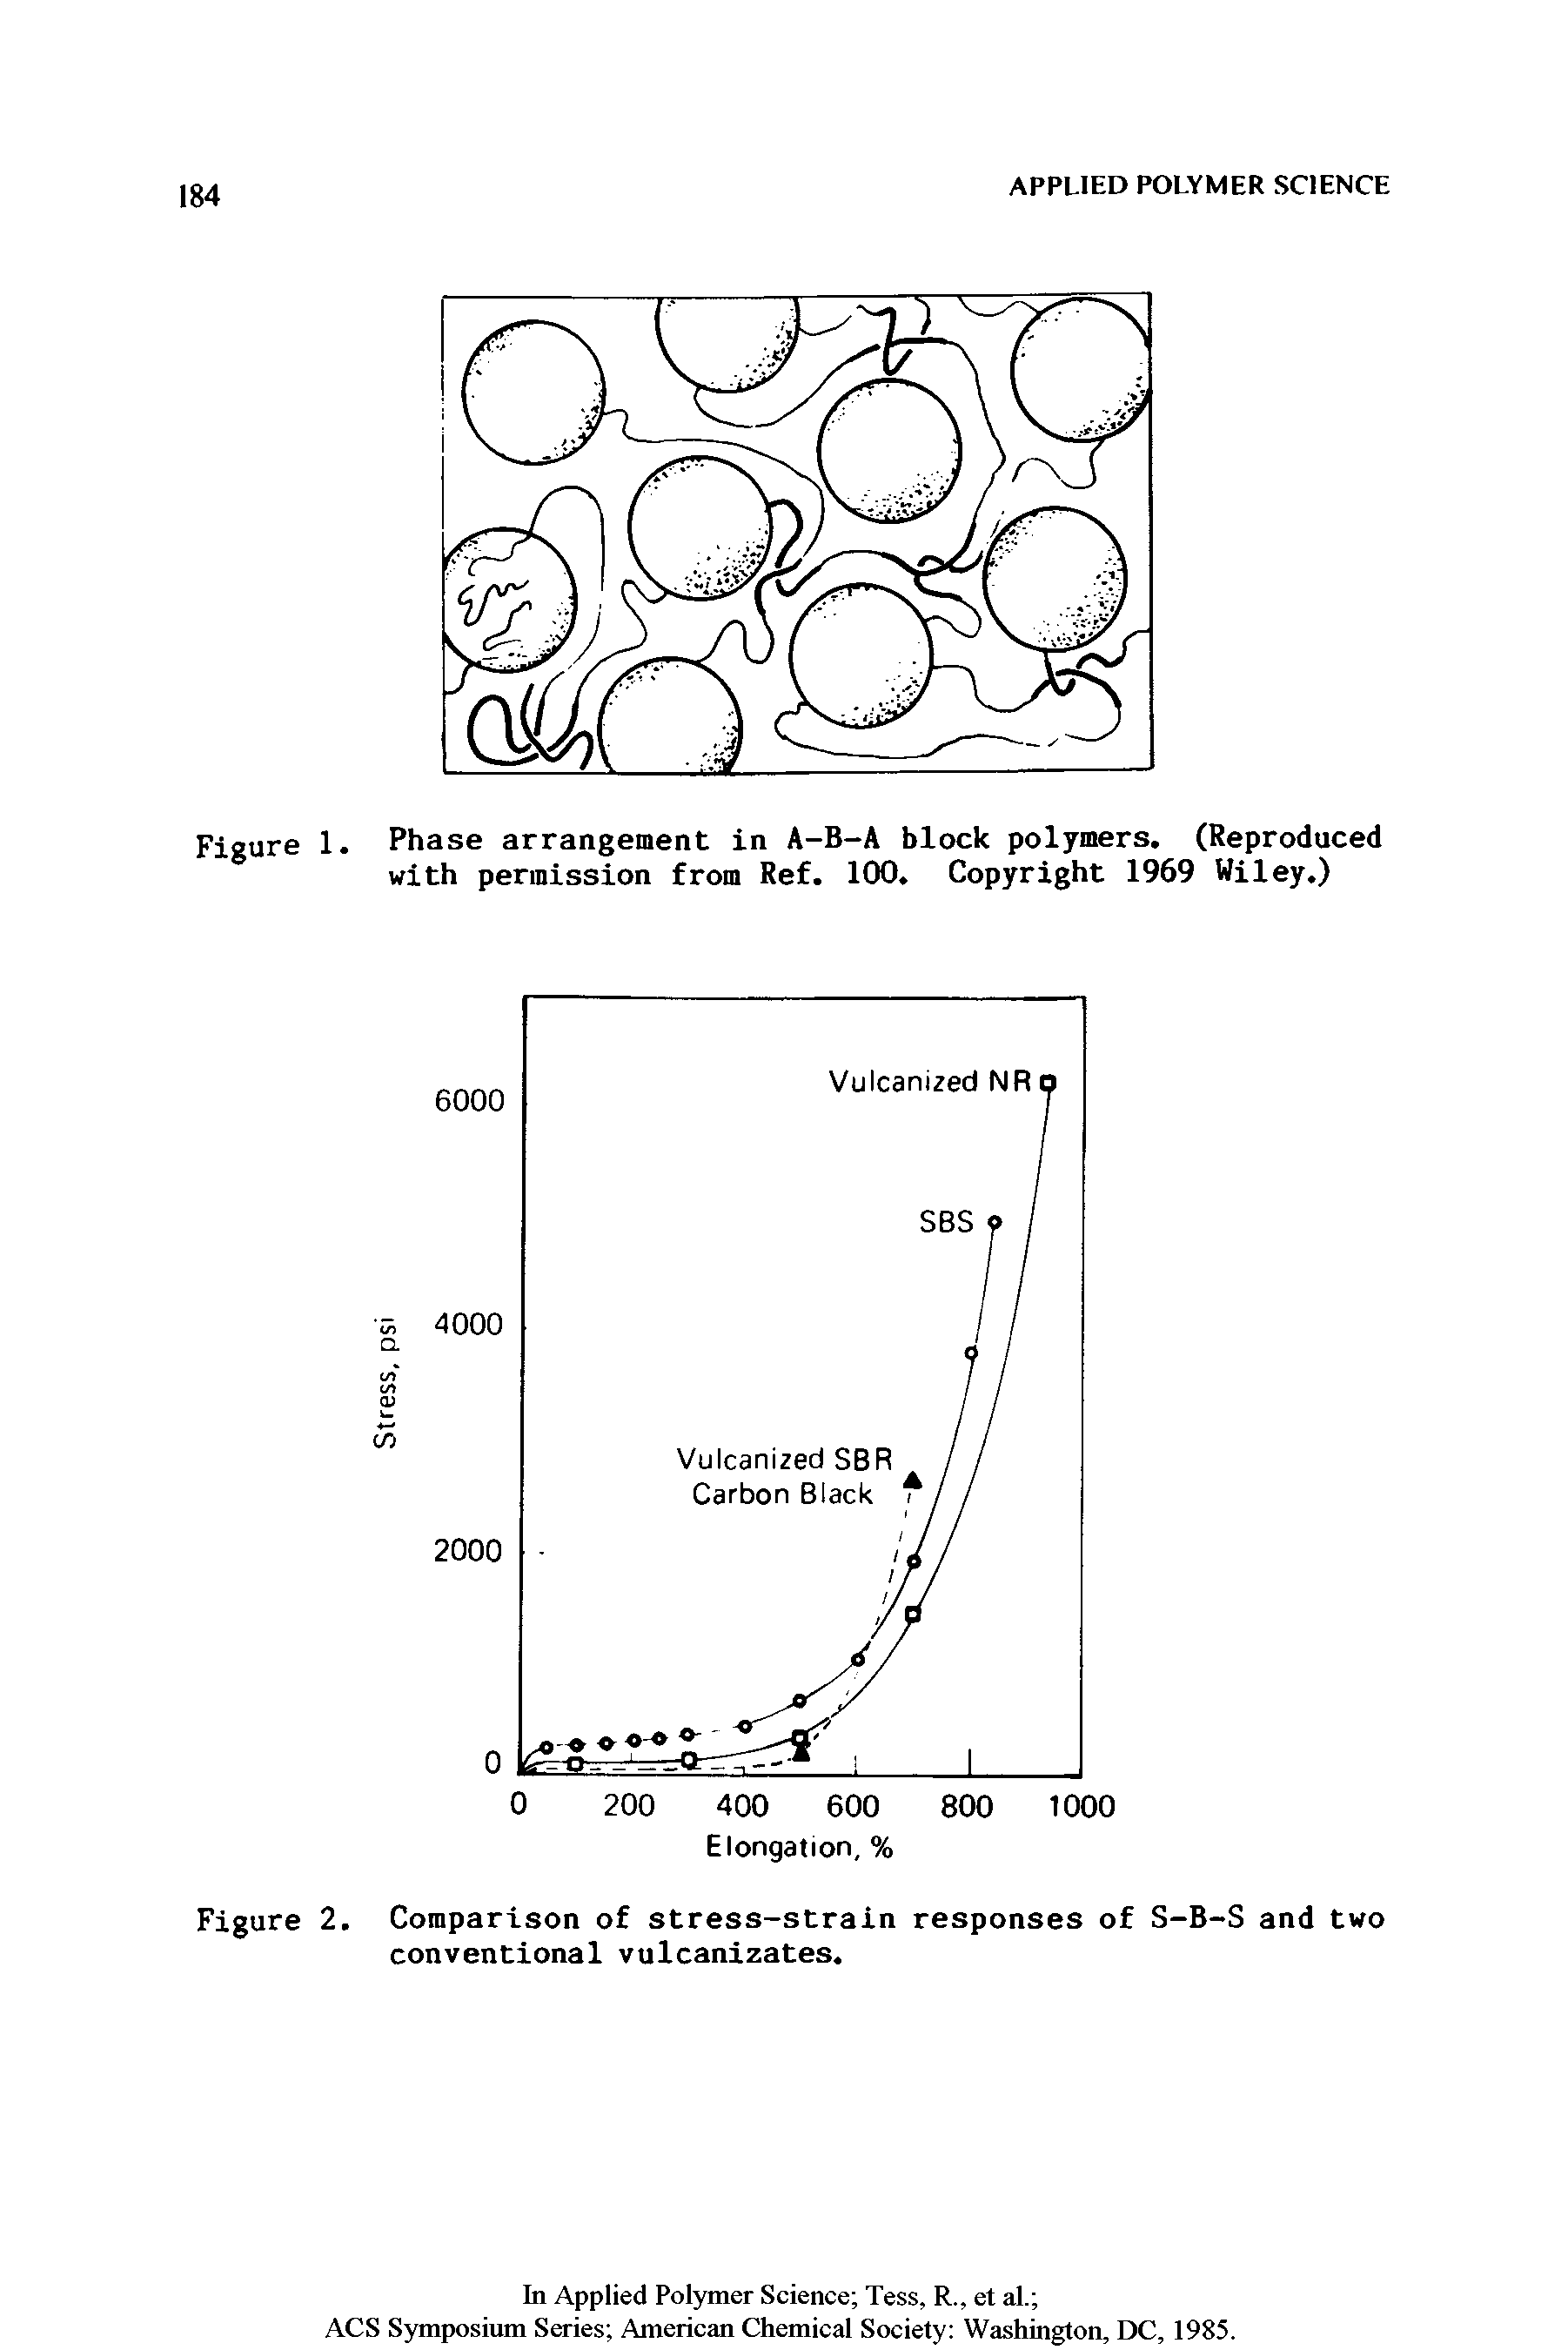 Figure 1. Phase arrangement in A-B-A block polymers. (Reproduced with permission from Ref. 100. Copyright 1969 Wiley.)...